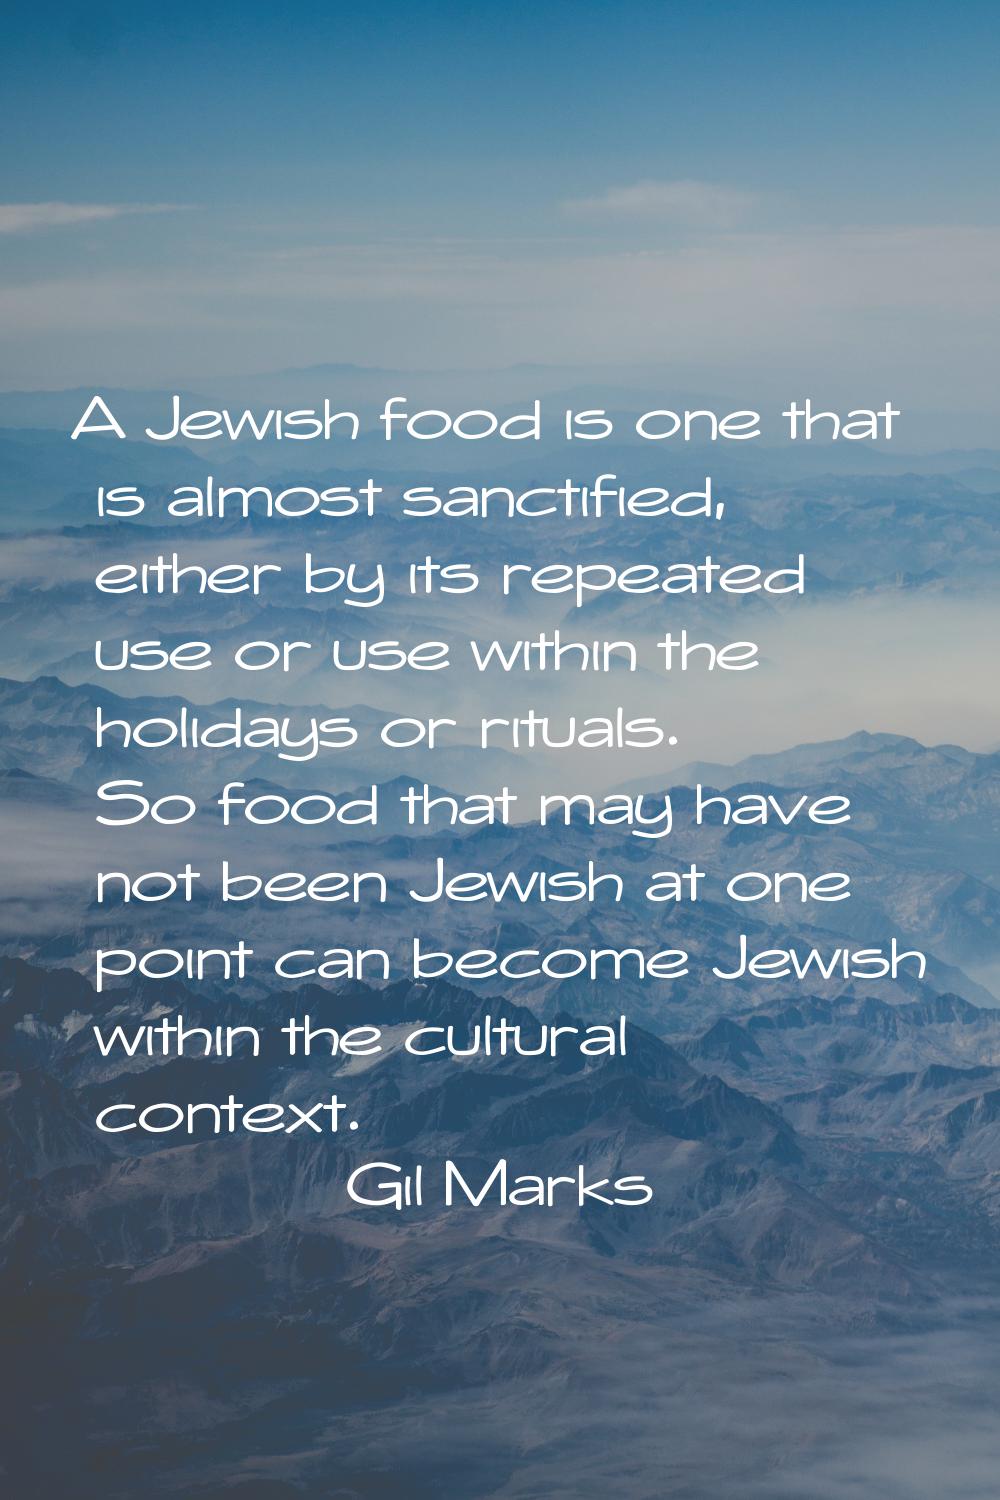 A Jewish food is one that is almost sanctified, either by its repeated use or use within the holida